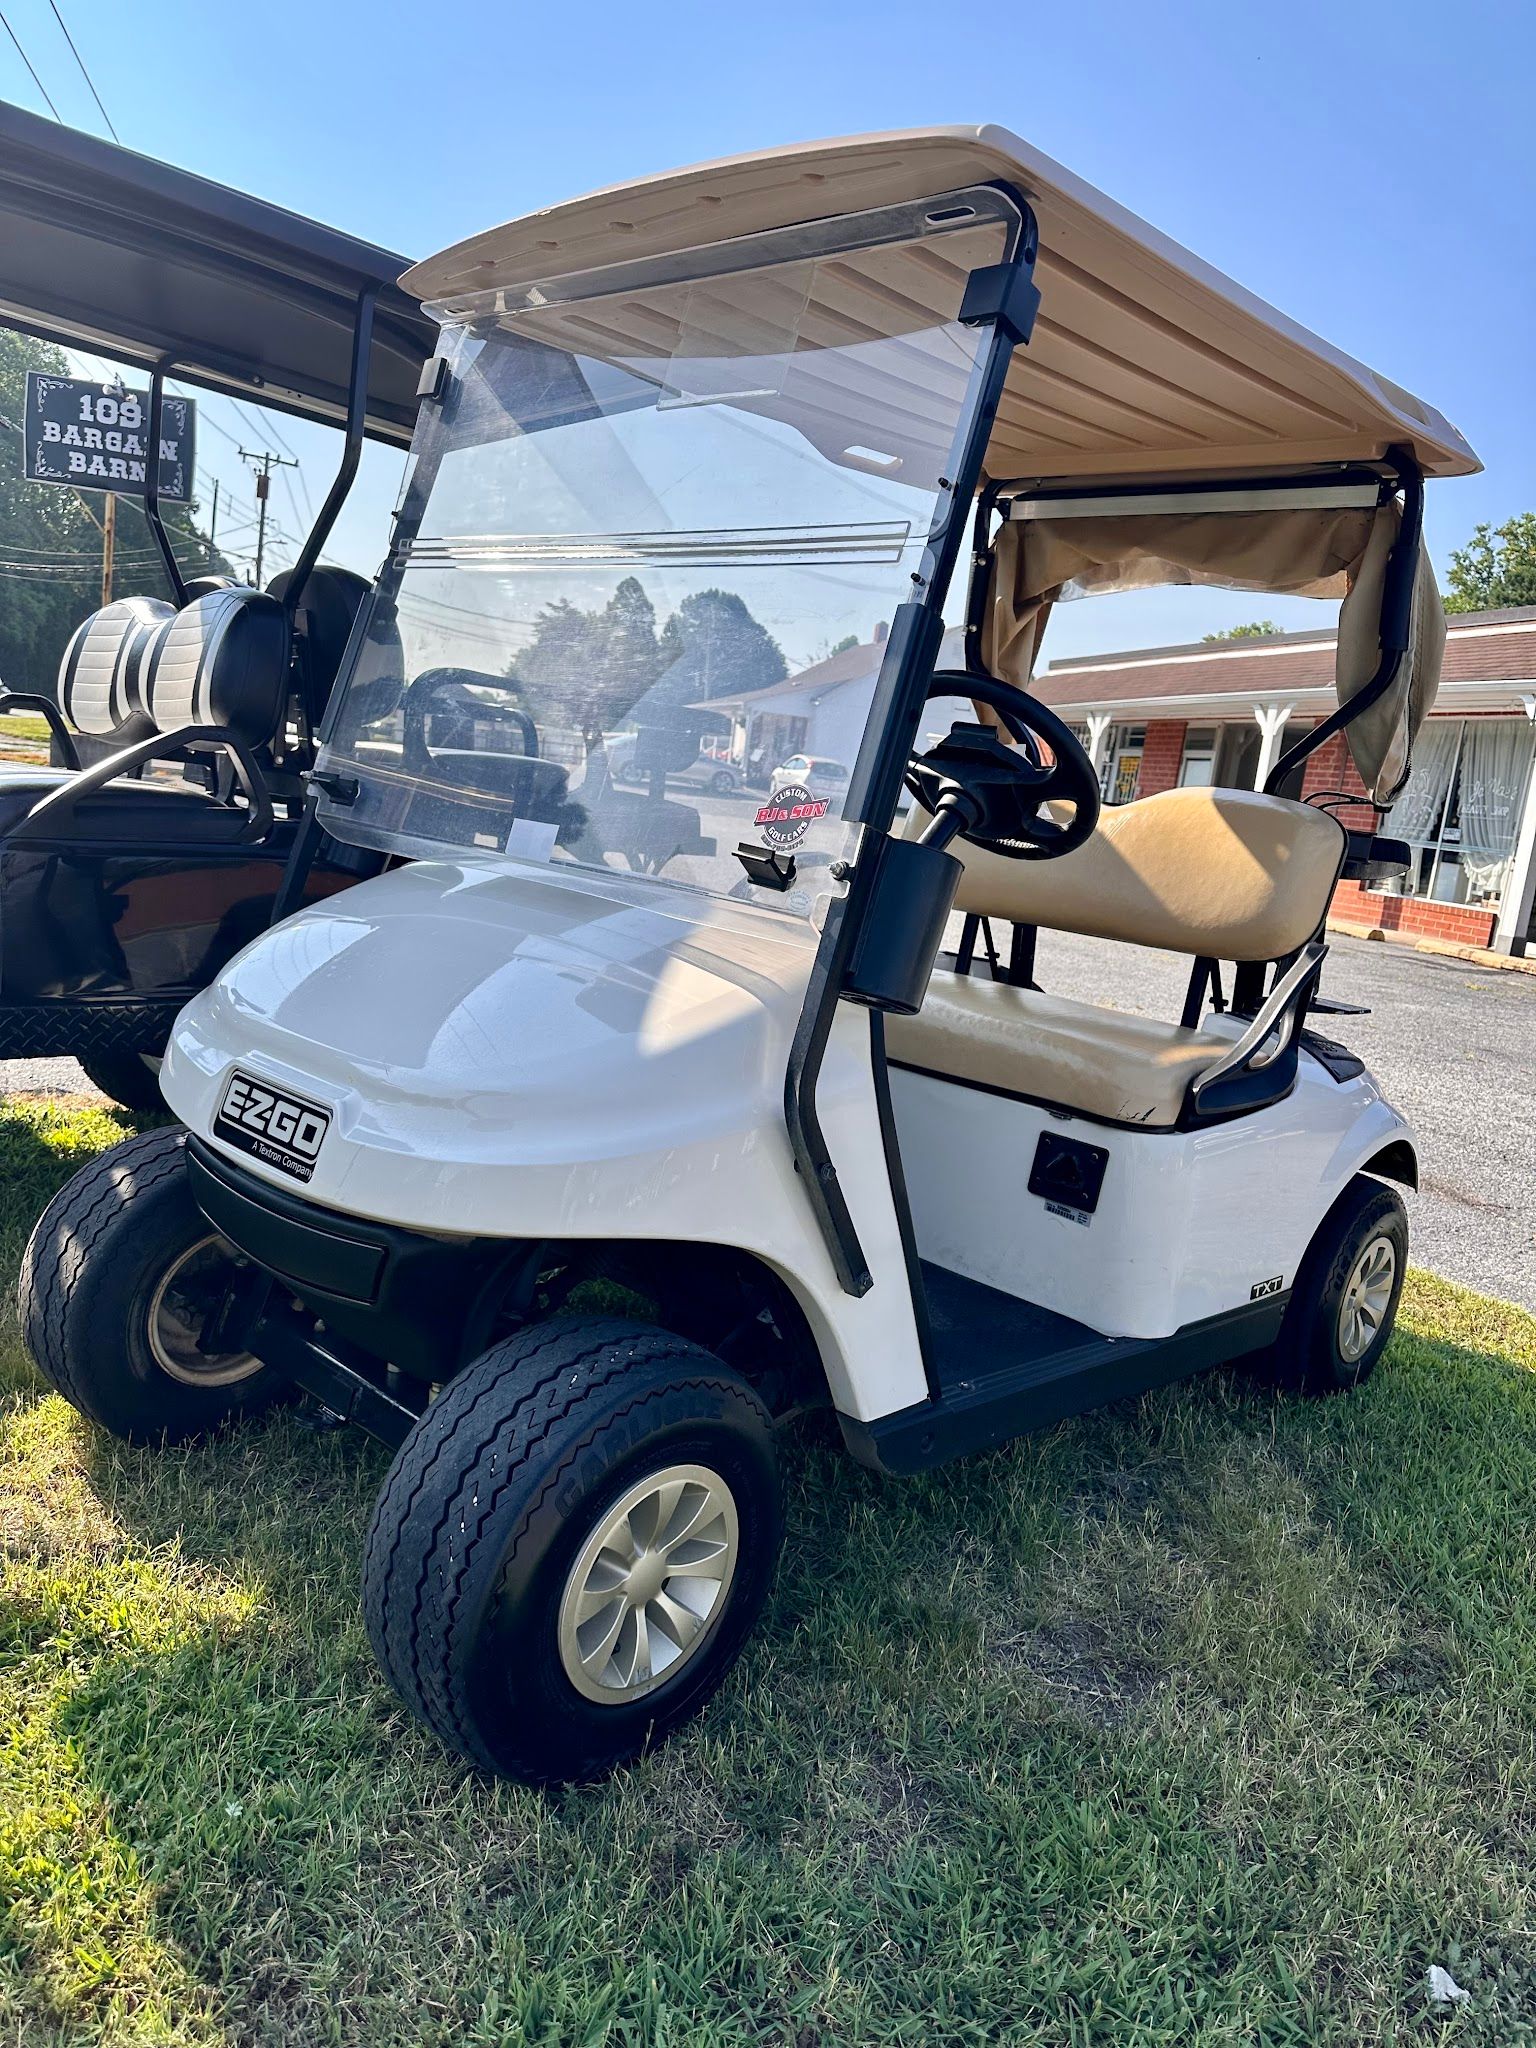 B J & Son Golf Cart Sales and Service